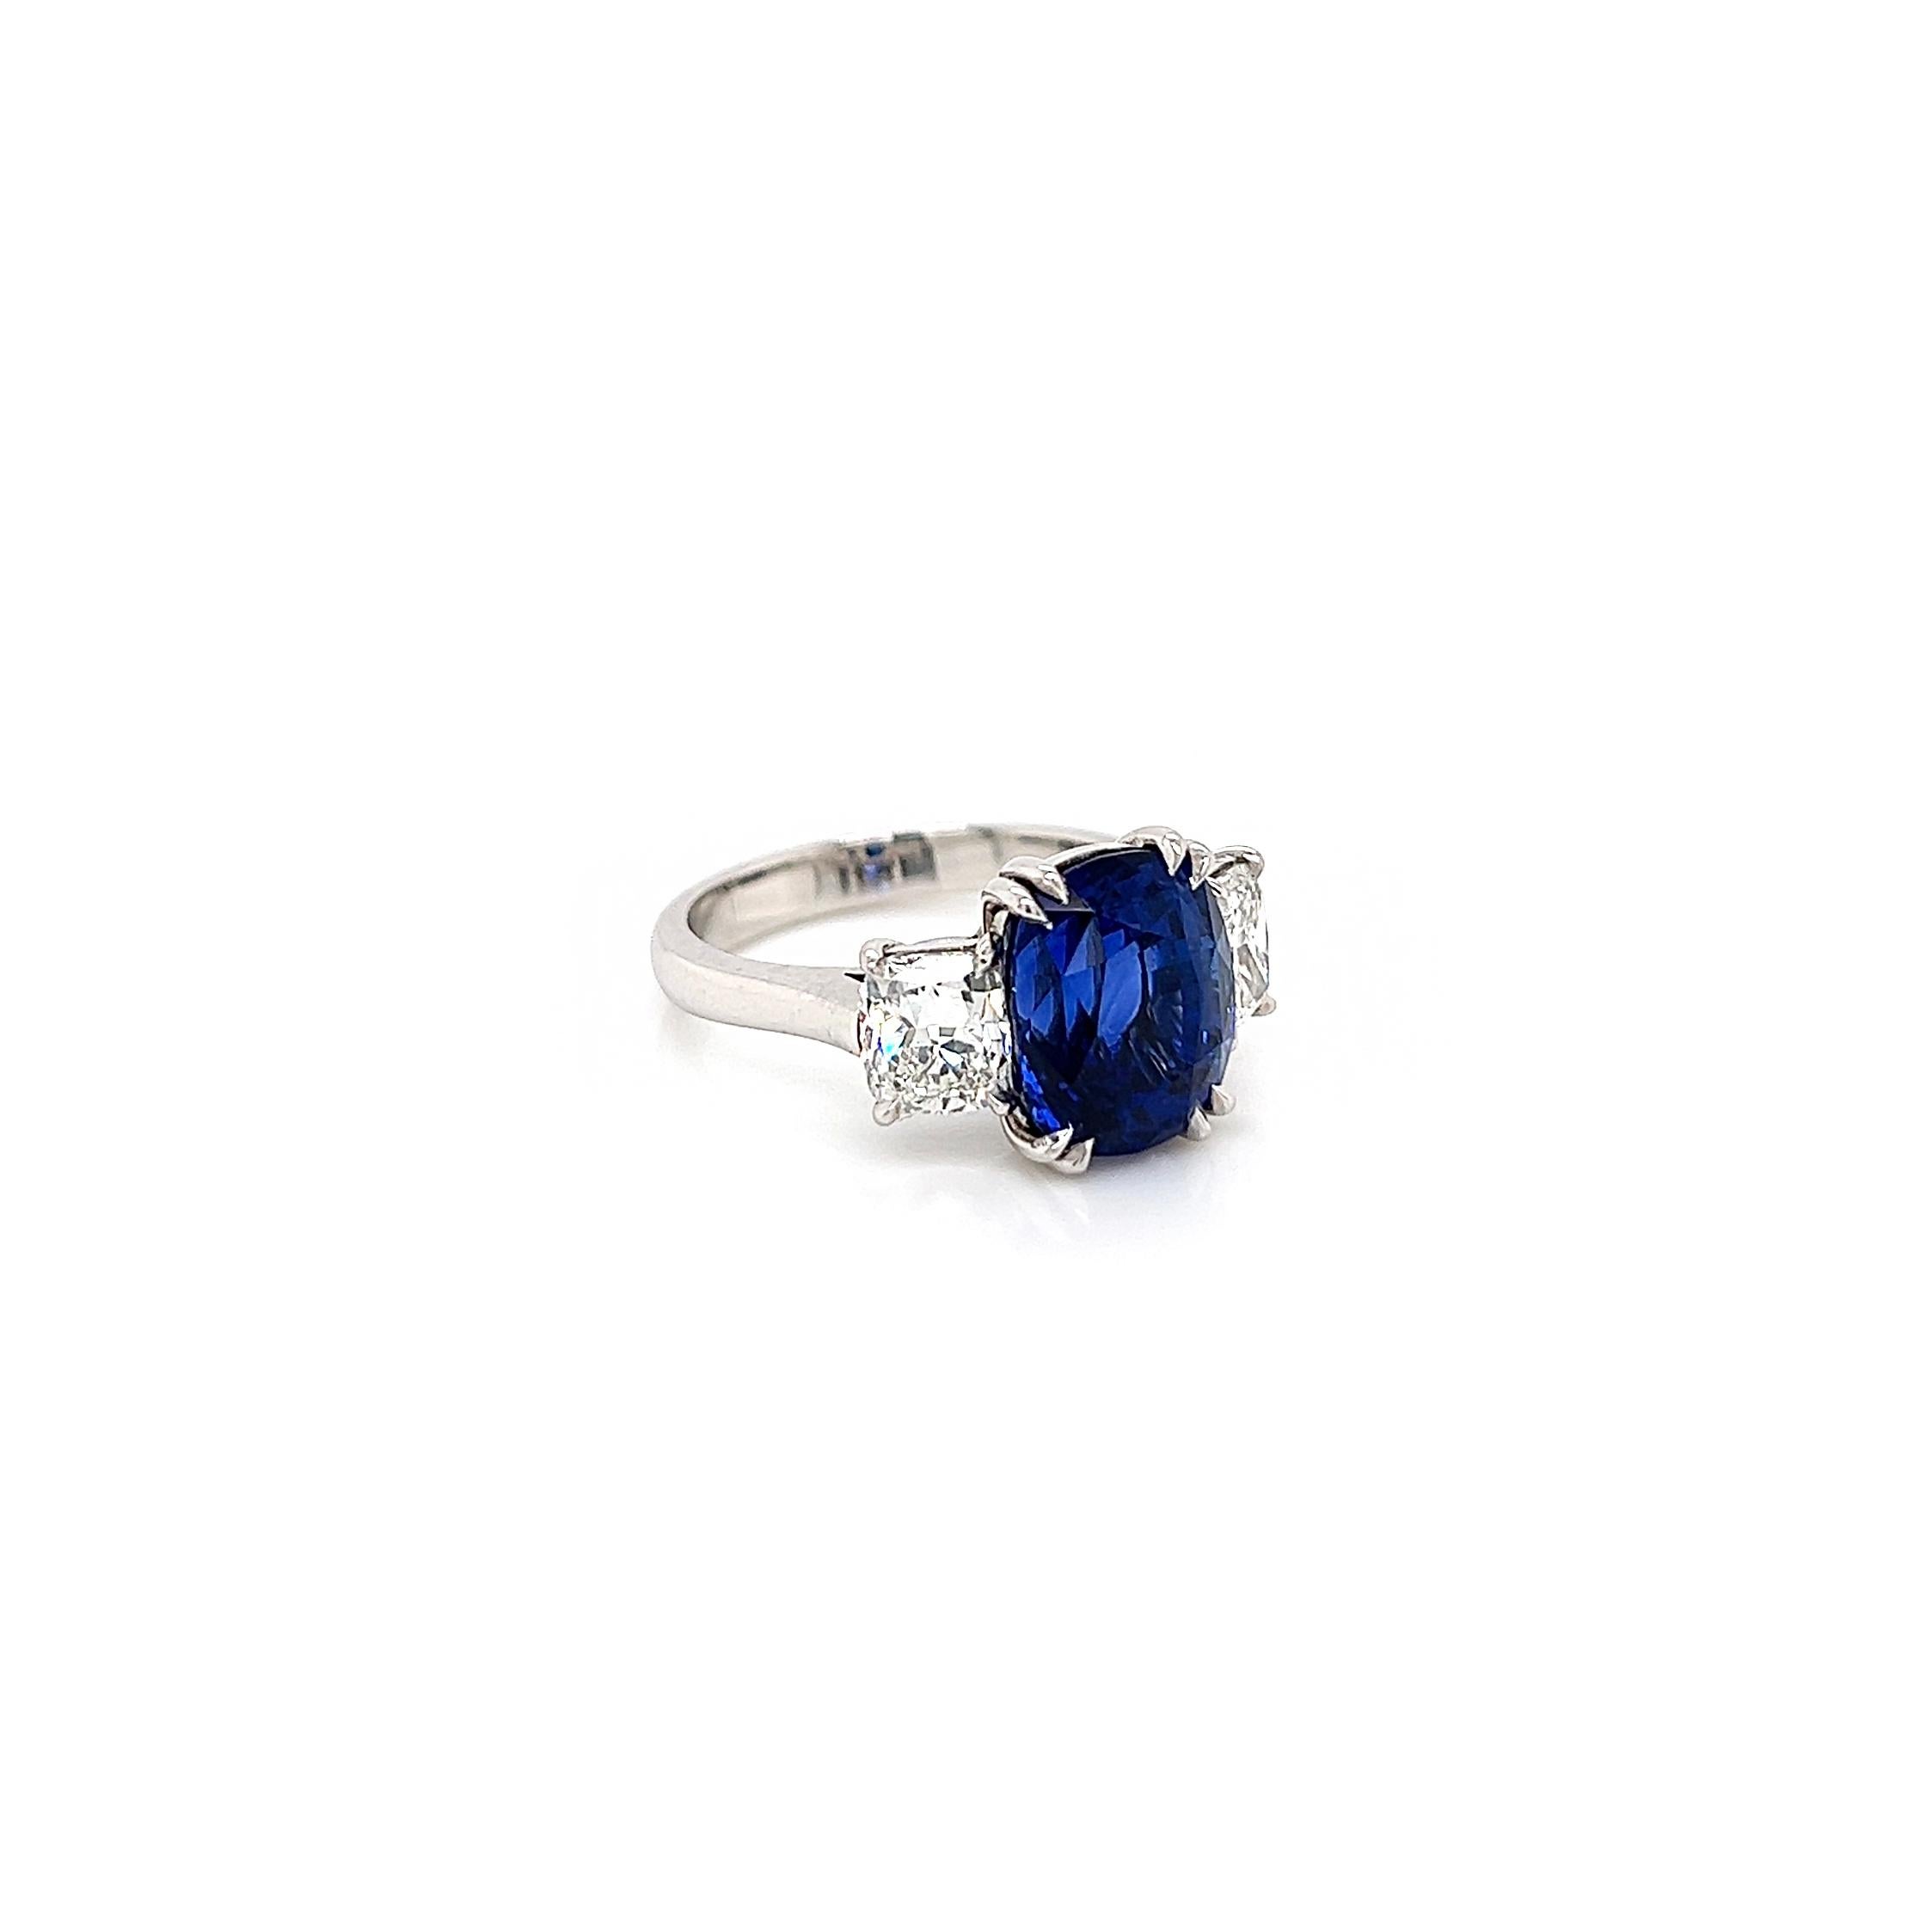 Cushion Cut 7.87 Total Carat Sapphire and Diamond Ladies Ring GIA For Sale